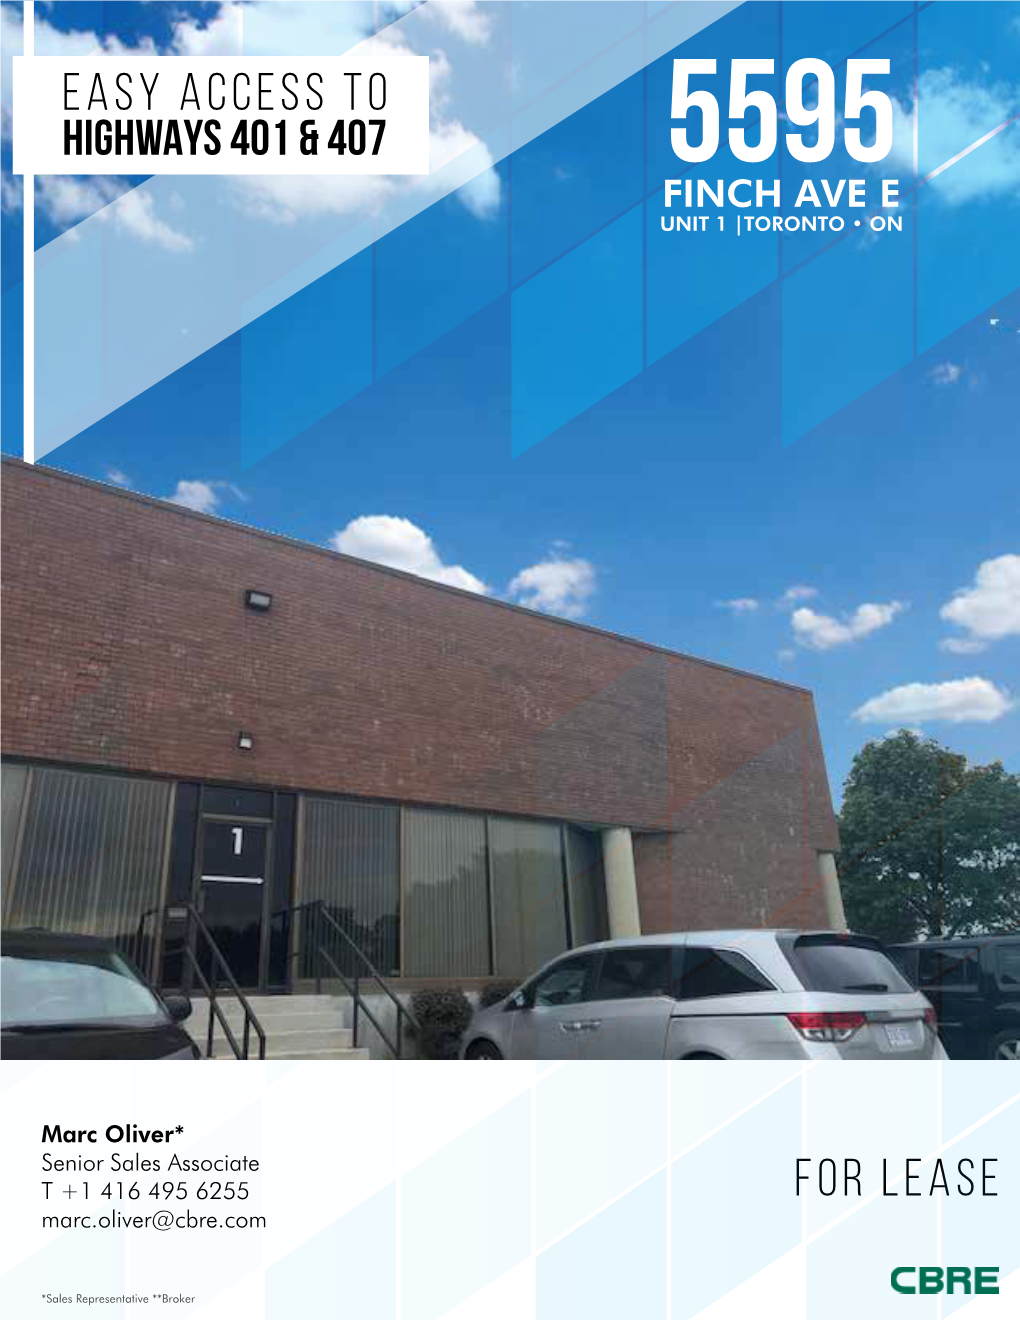 Easy Access to for Lease